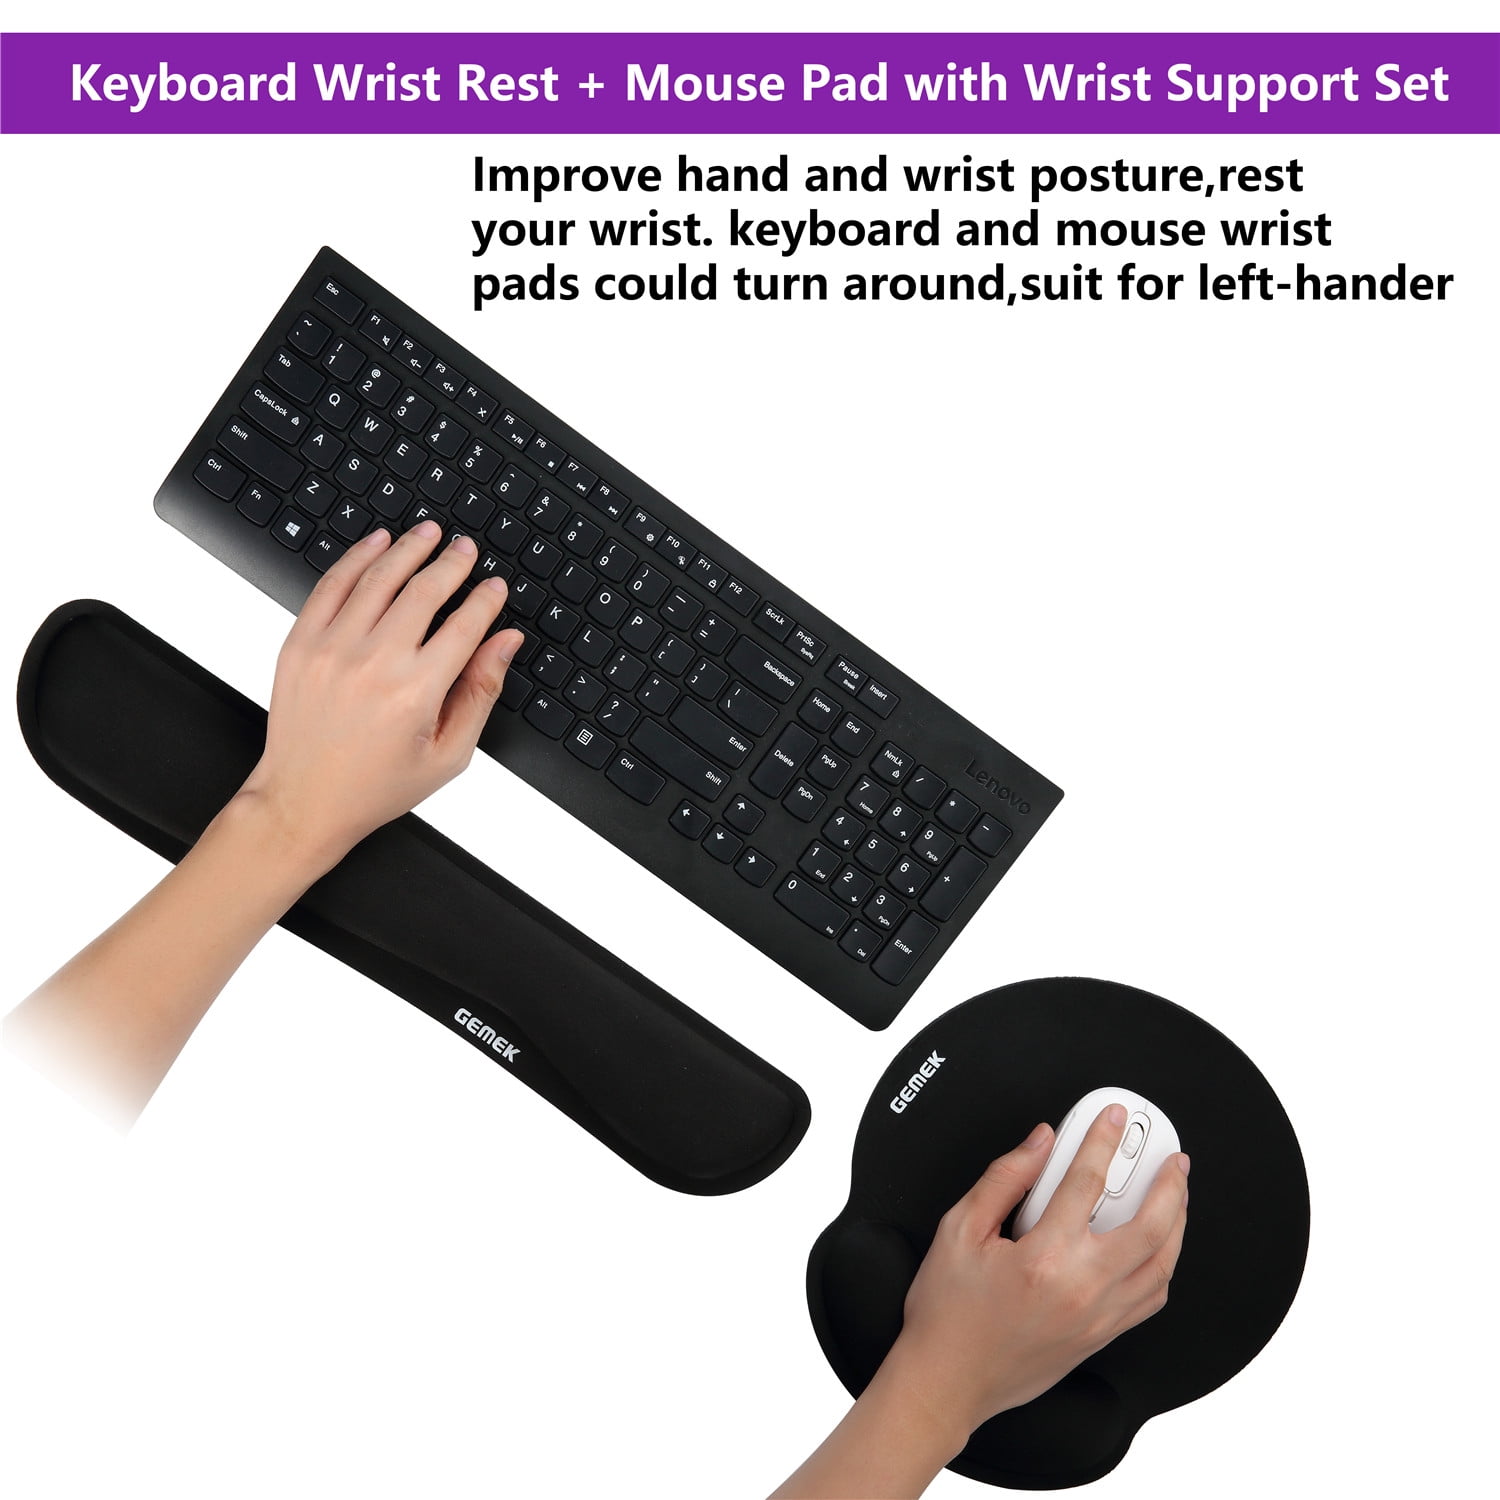 NEX Ergonomic Mouse Pad with Wrist Support, Memory Foam Keyboard Wrist Rest  for Computer, Green (NX-PAD004) 